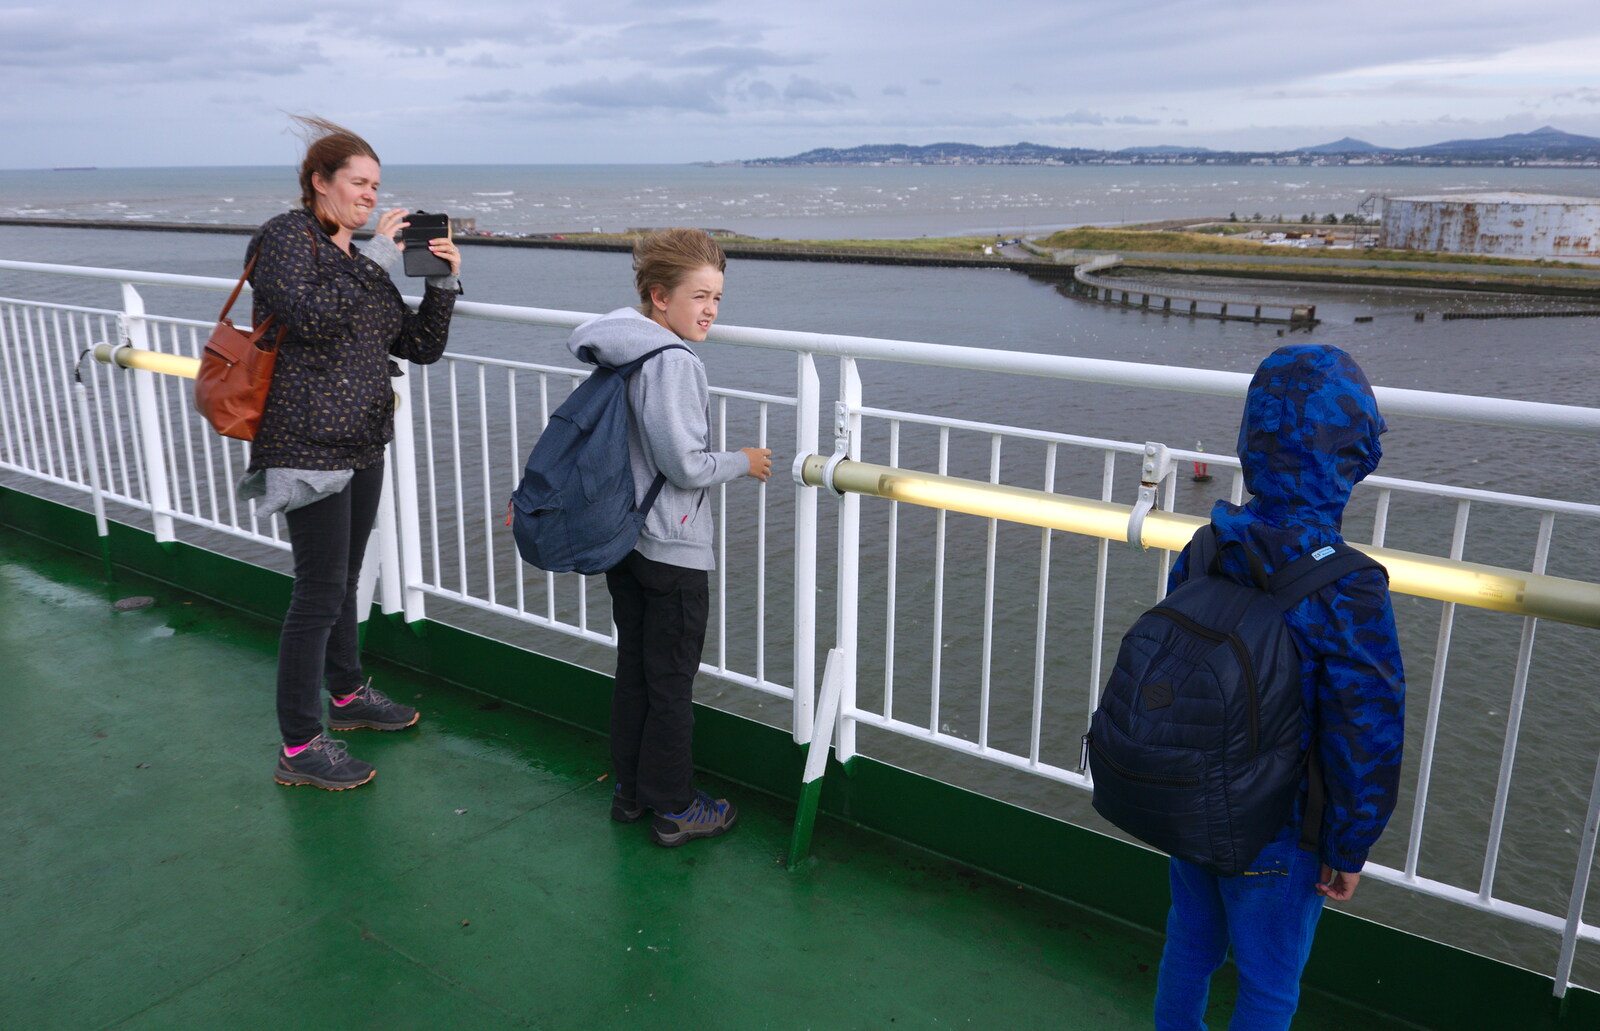 The gang look out as the ferry trundles in from The Summer Trip to Ireland, Monkstown, Co. Dublin, Ireland - 9th August 2019